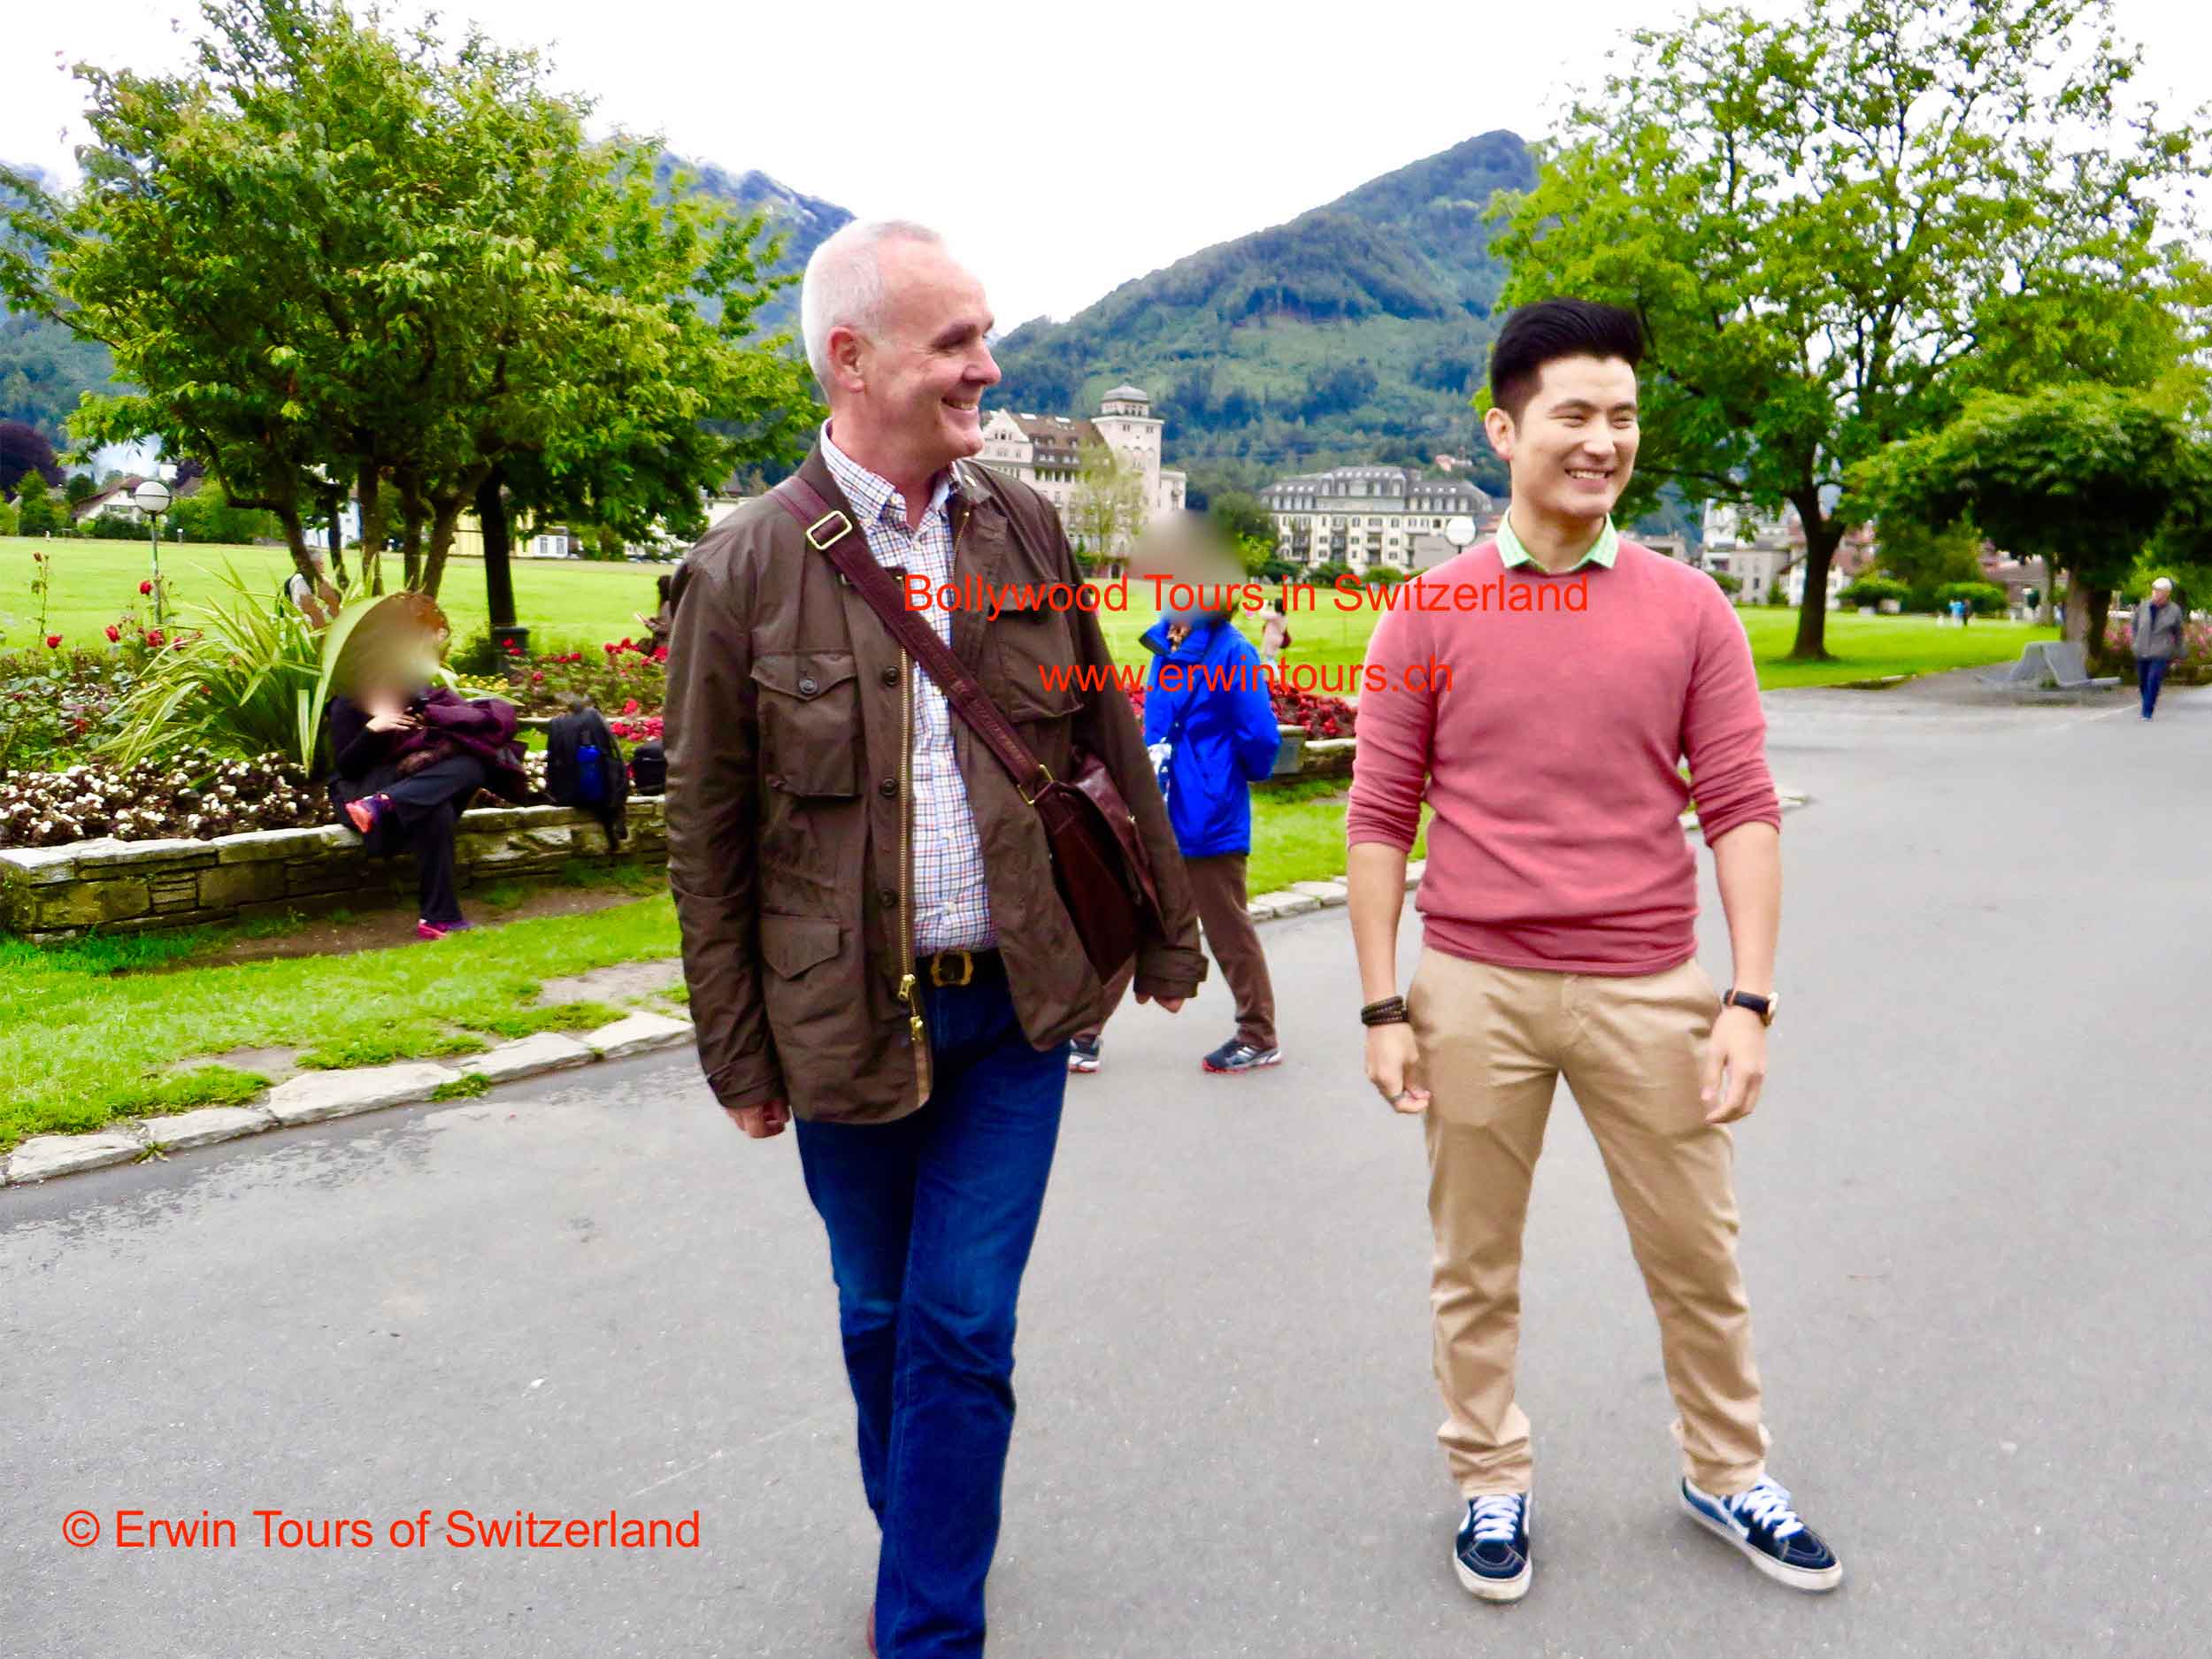 Bollywood Actor and Singer Meiyang Chang in Switzerland with Erwin Fässler CEO Erwin Tours of Switzerland - Bollywood Tours in Switzerland - www.erwintours.ch